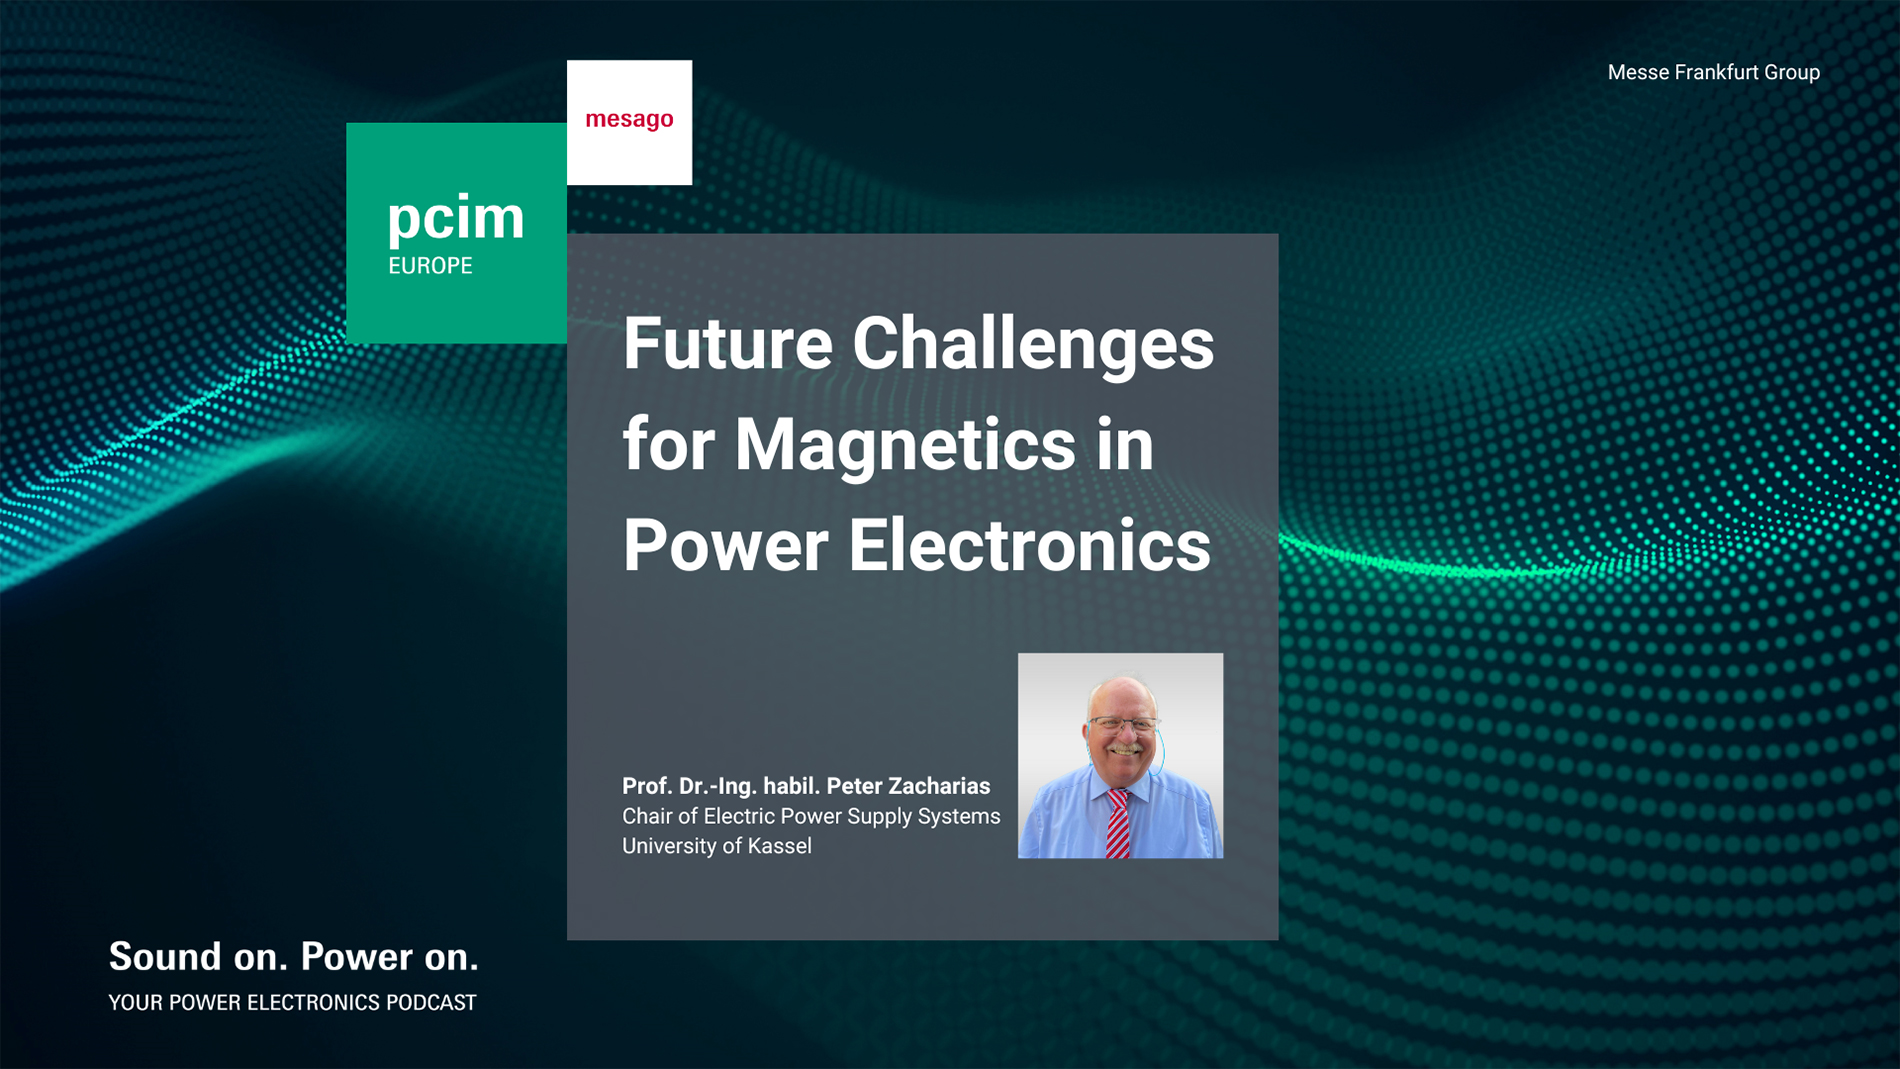 Prof. Dr.-Ing. habil. Peter Zacharias from University of Kassel on the future challanges for magnetics in power electronics